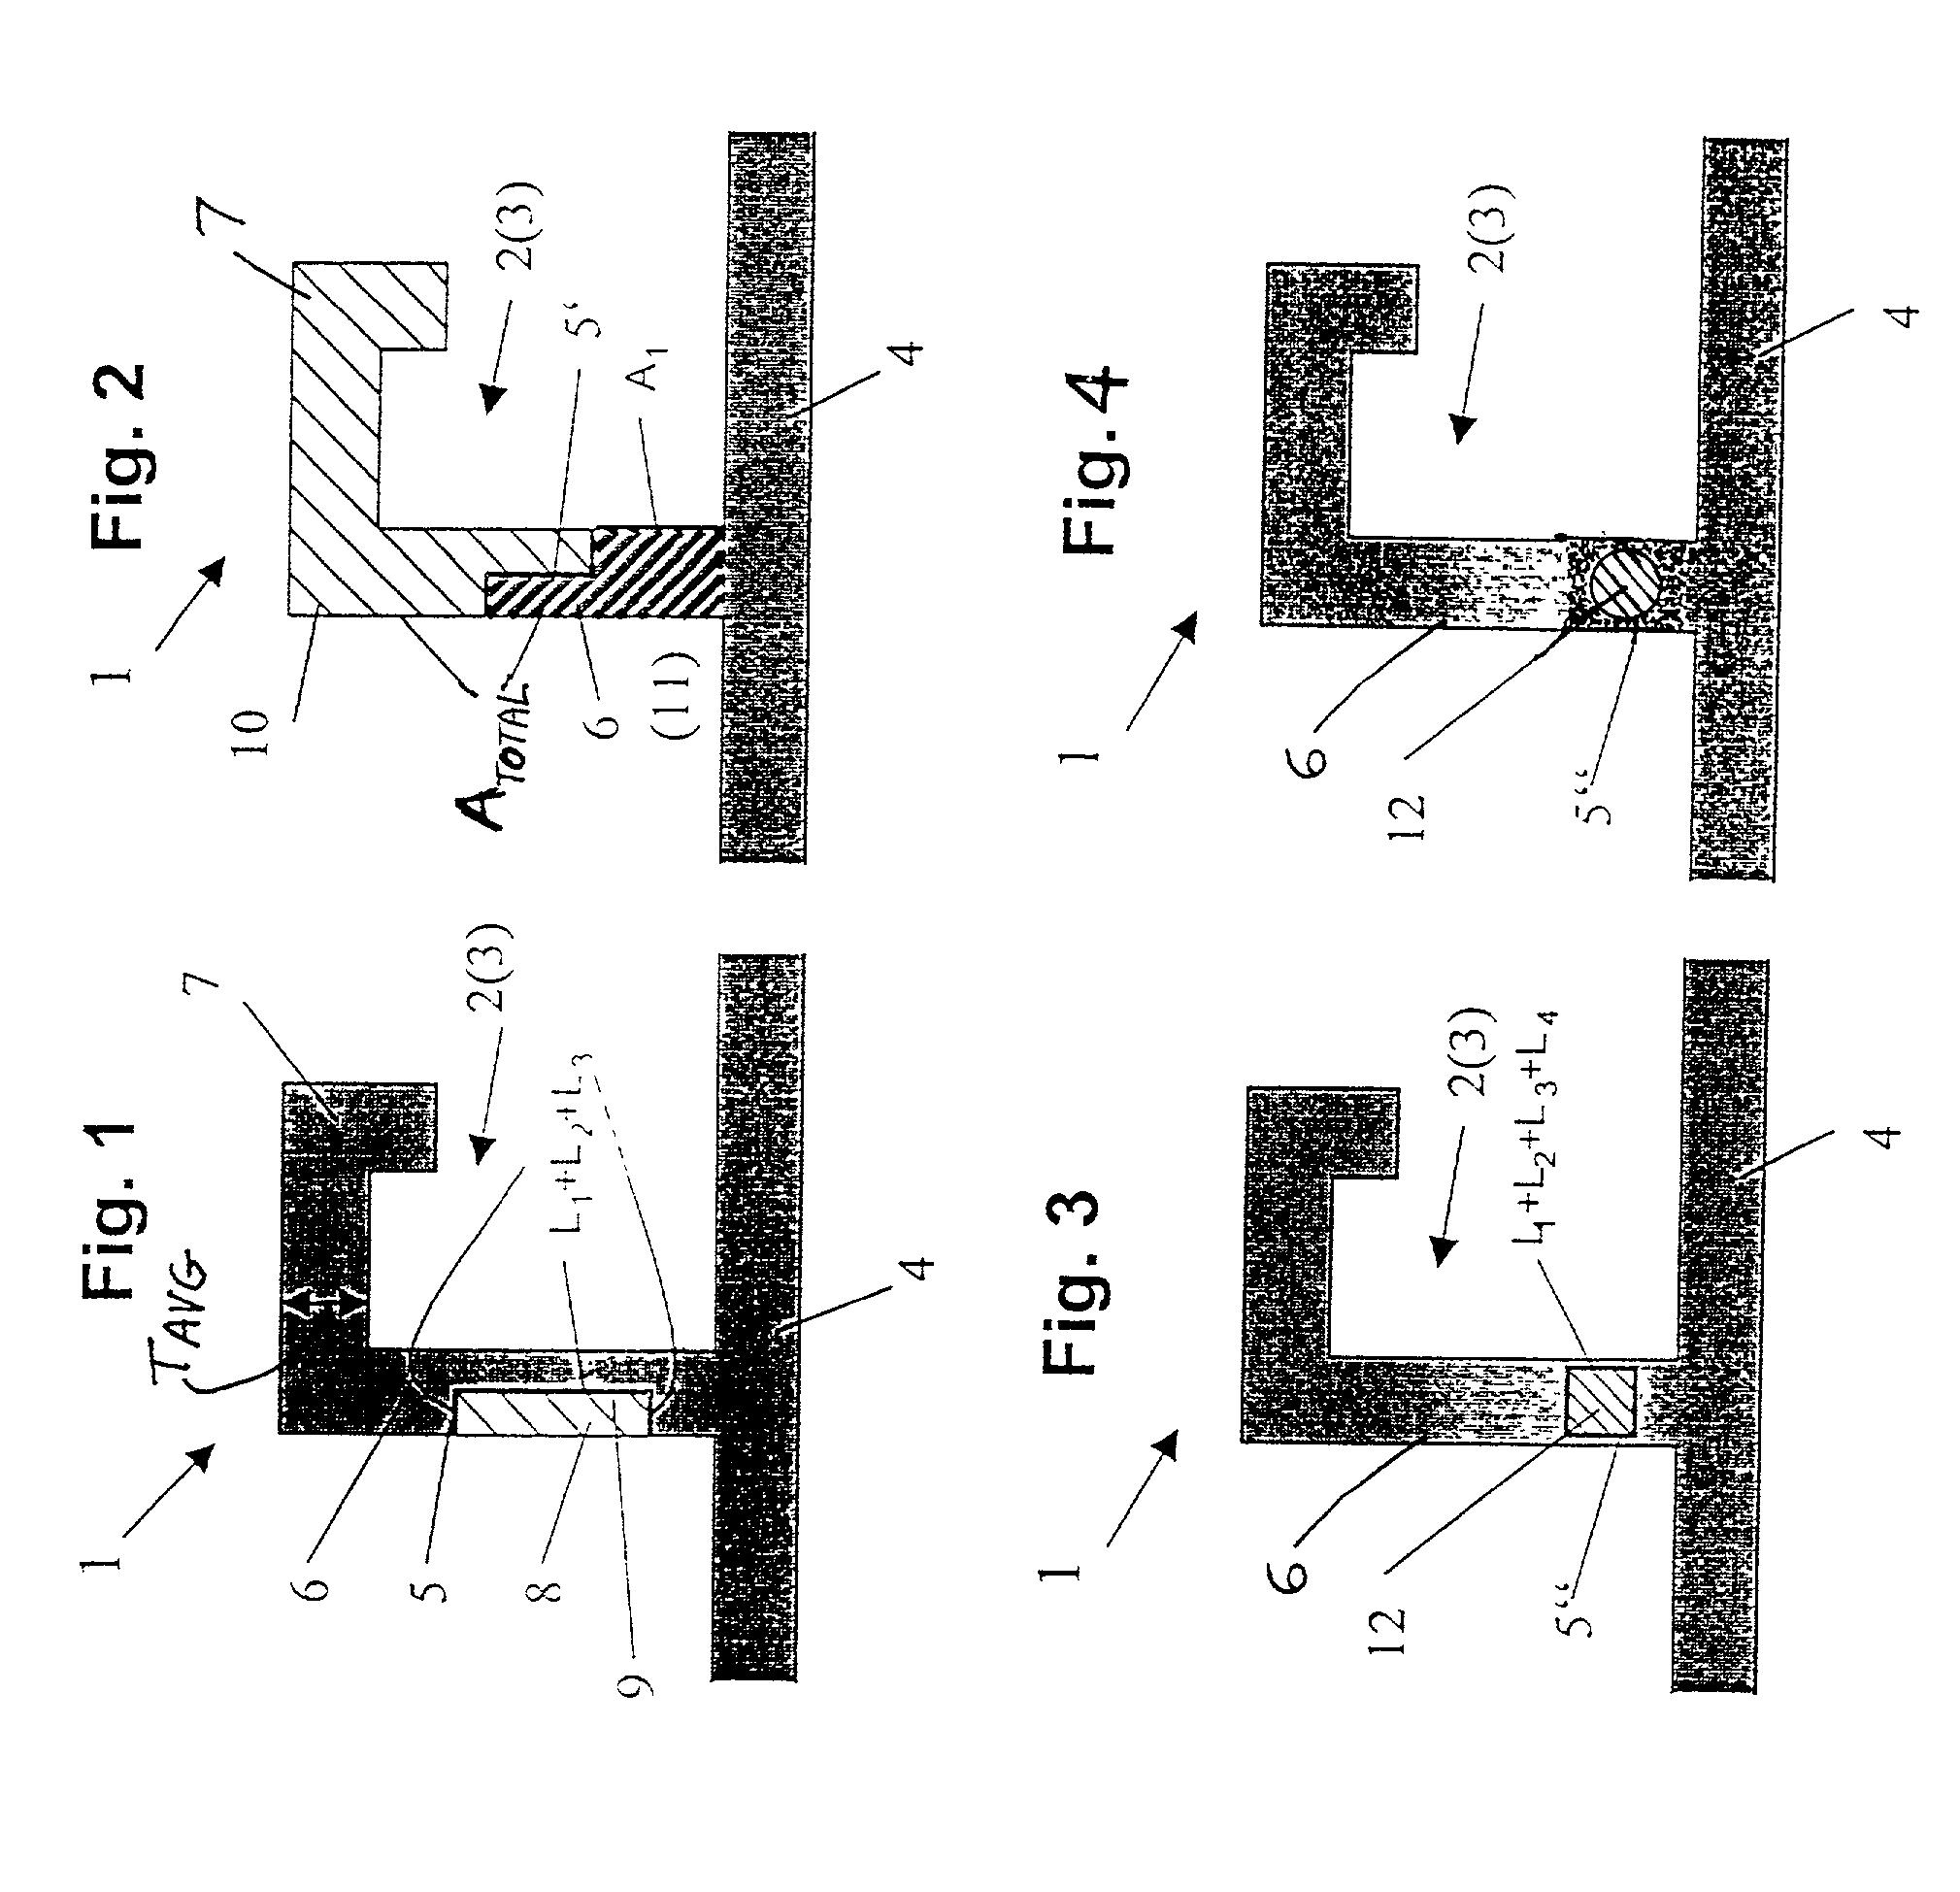 Metal structural component for an aircraft, with resistance to crack propagation